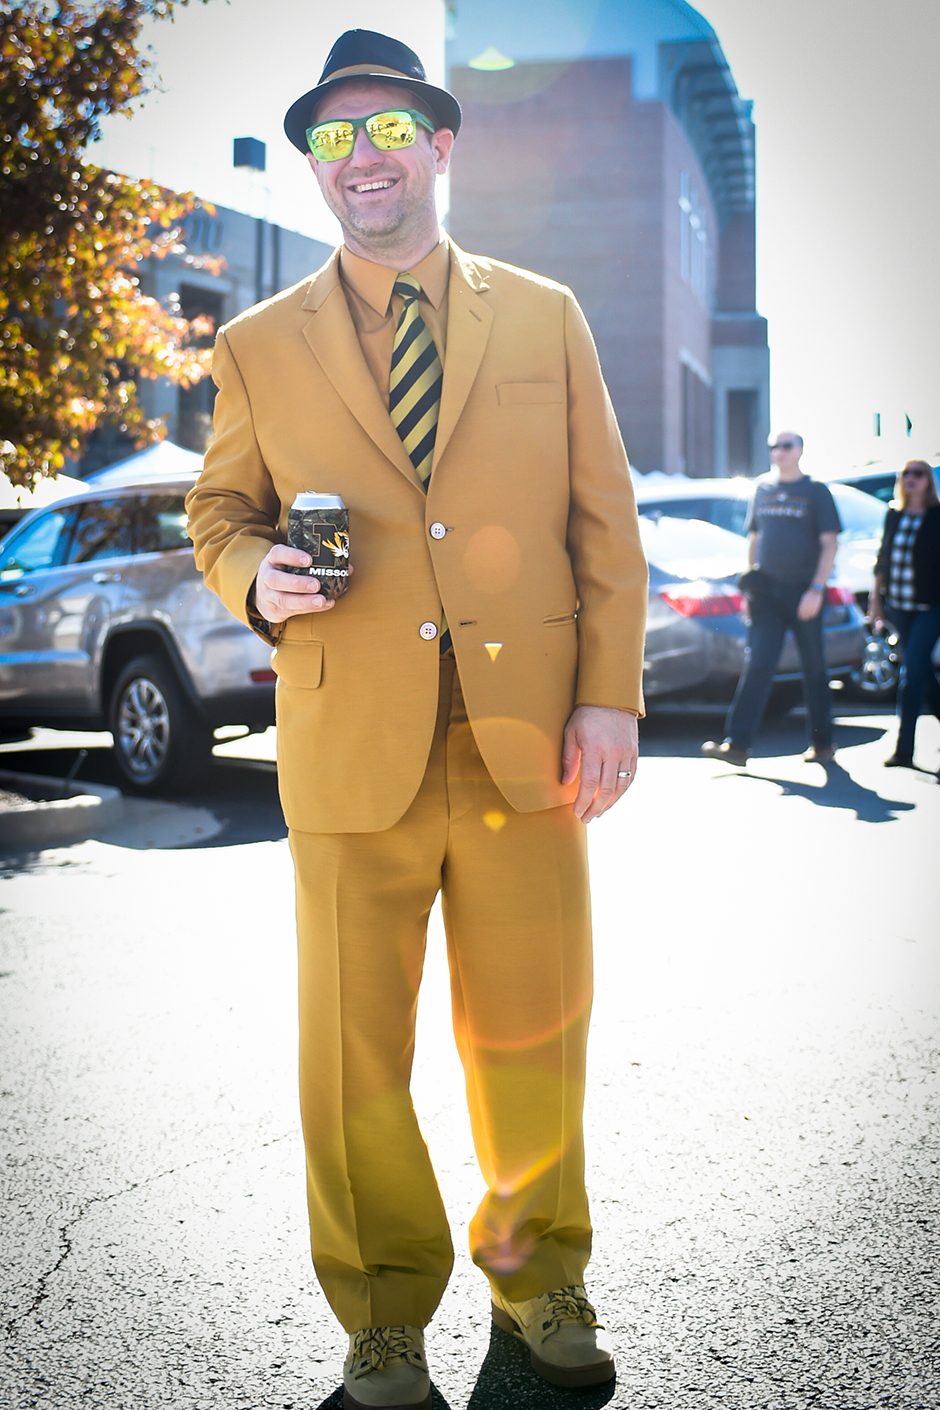 Art Hochthurn, a Mizzou fan from New Hampshire, suits up for the game. Photo by Shane Epping